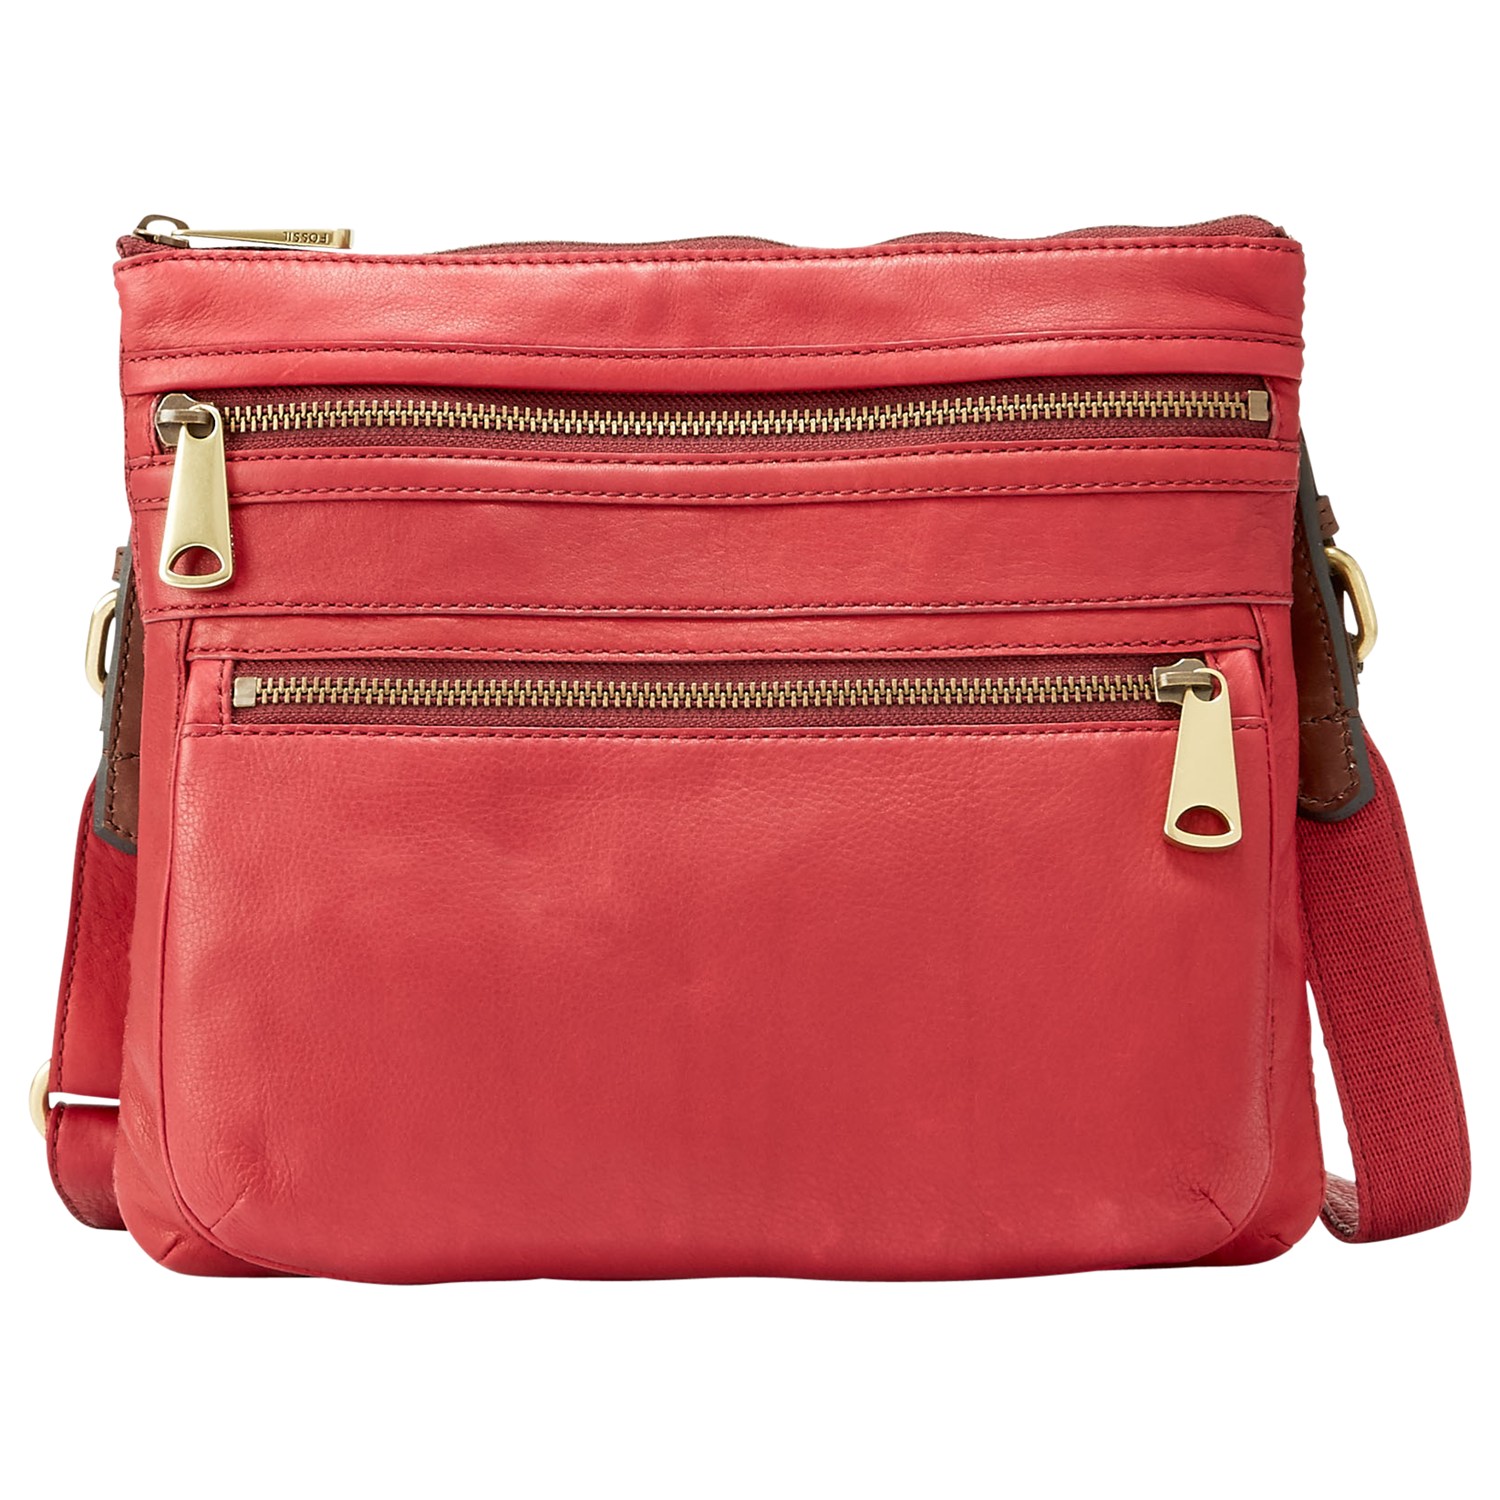 Fossil Explorer Crossbody Bag in Red (Cranberry) | Lyst